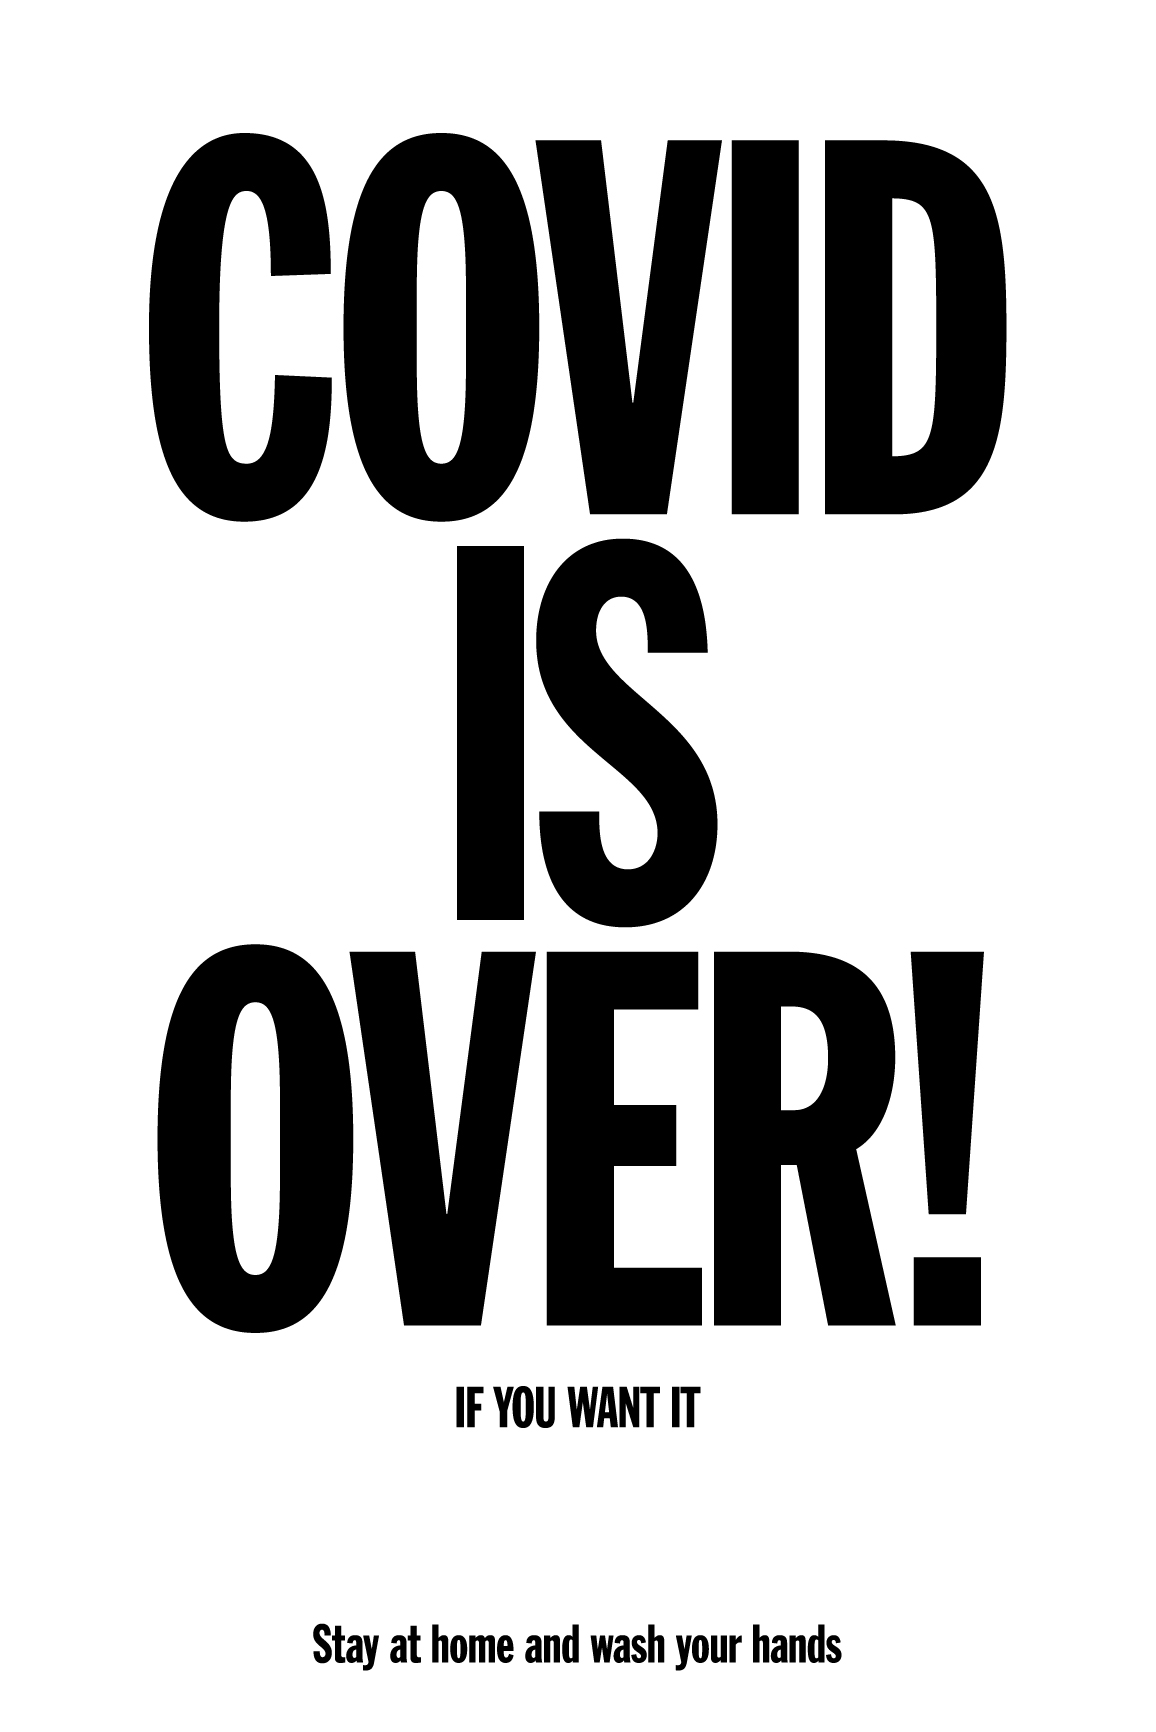 Covid is over!